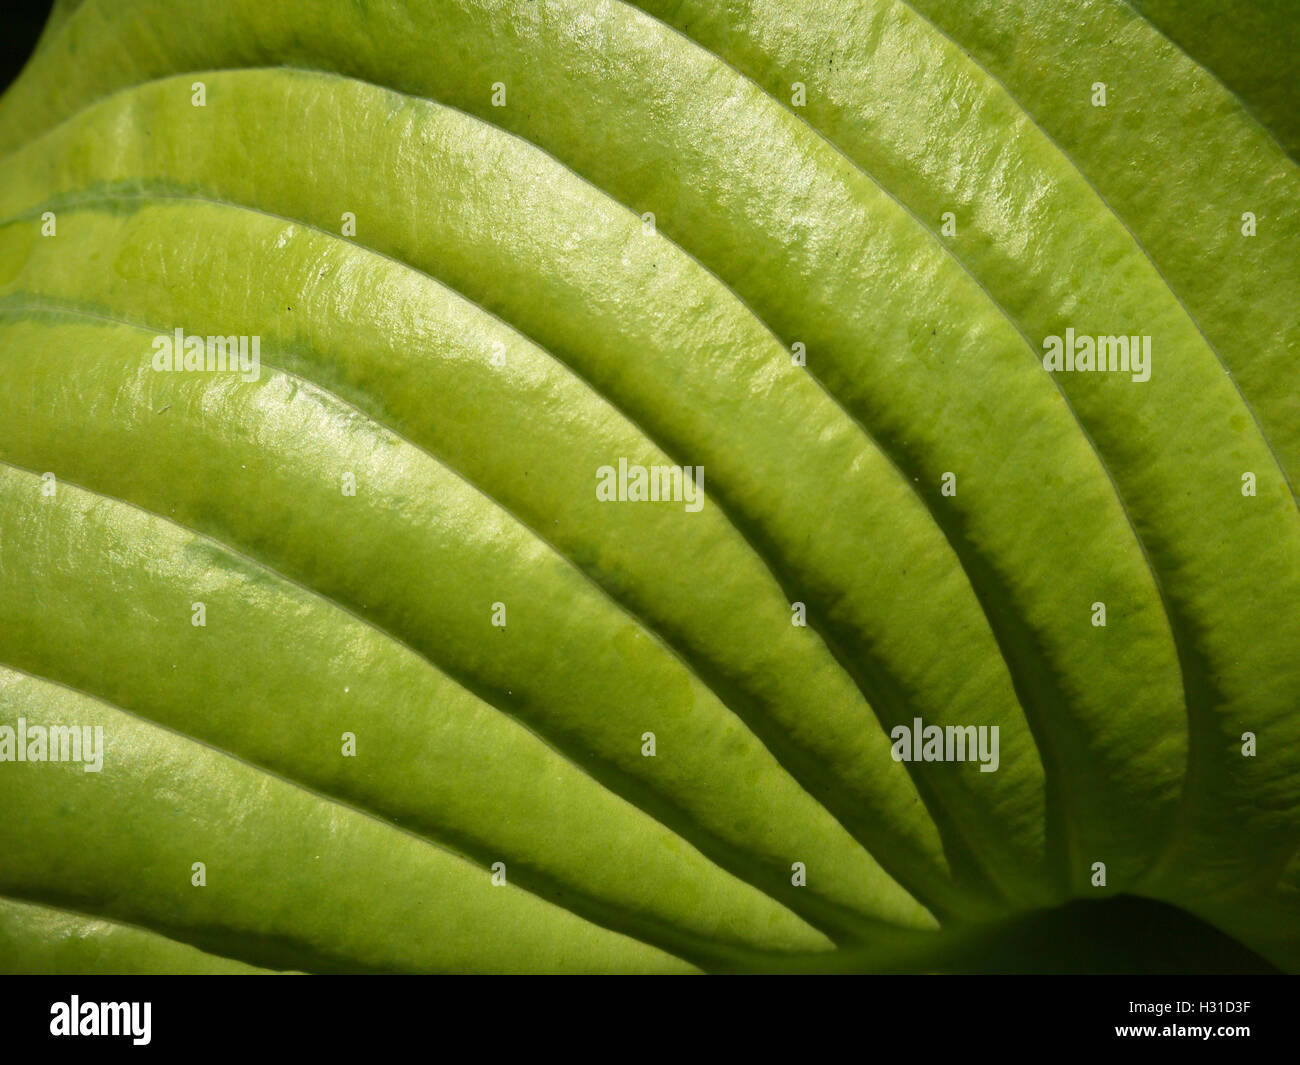 Hosta leaf veins abstract picture Stock Photo